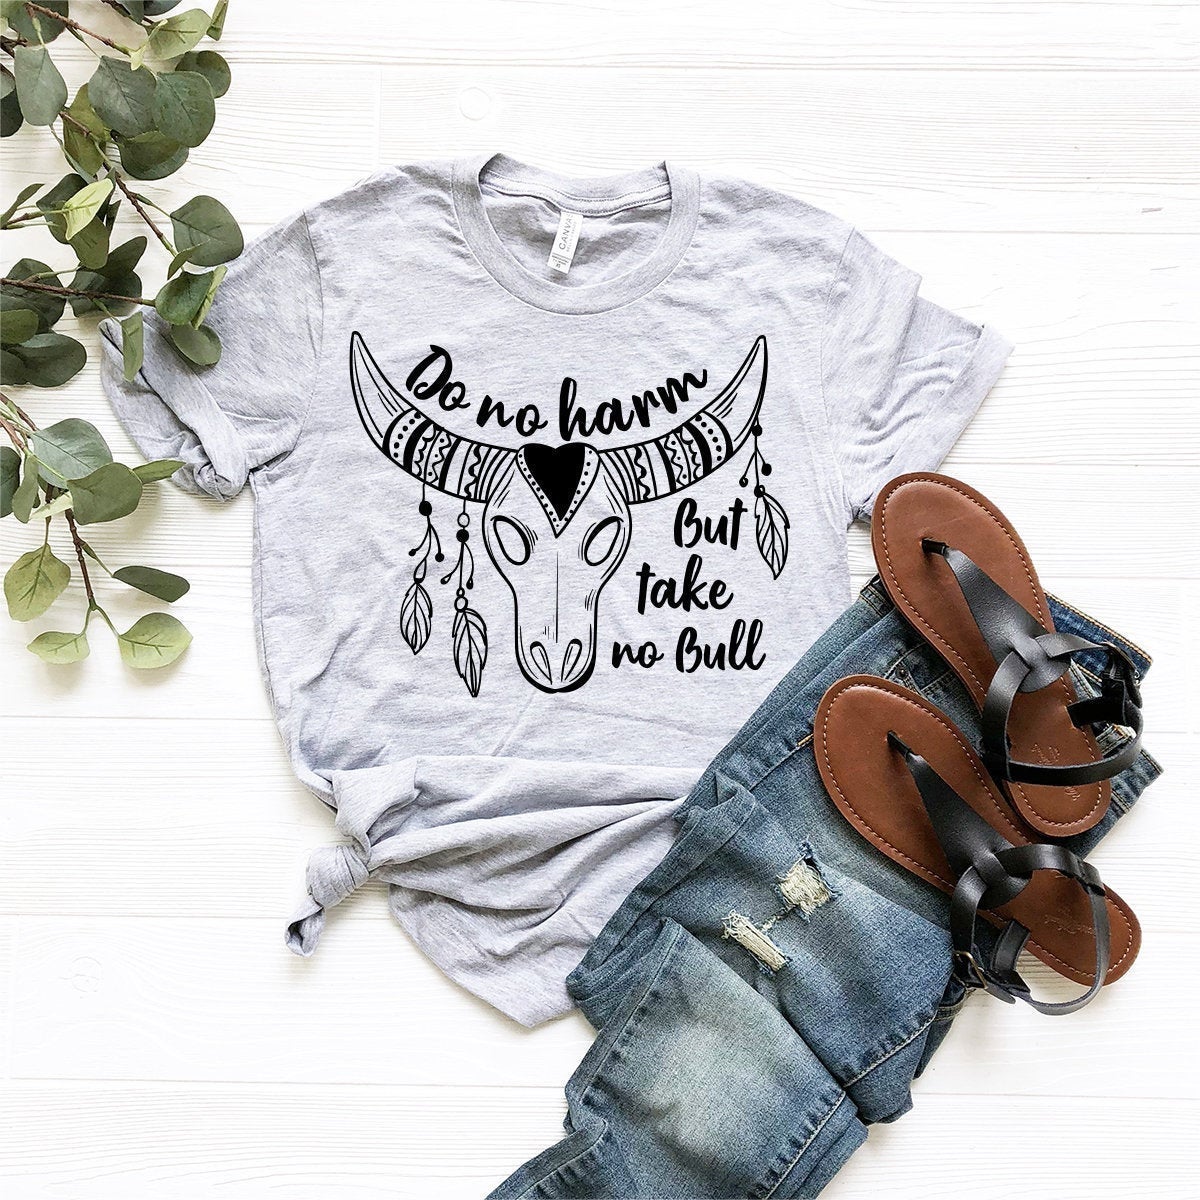 Western Graphic Tee, Country Girl Shirt, Do No Harm But Take No Bull Shirt, Cowgirl T-Shirt, Southern Shirts, Country Music Shirt - Fastdeliverytees.com